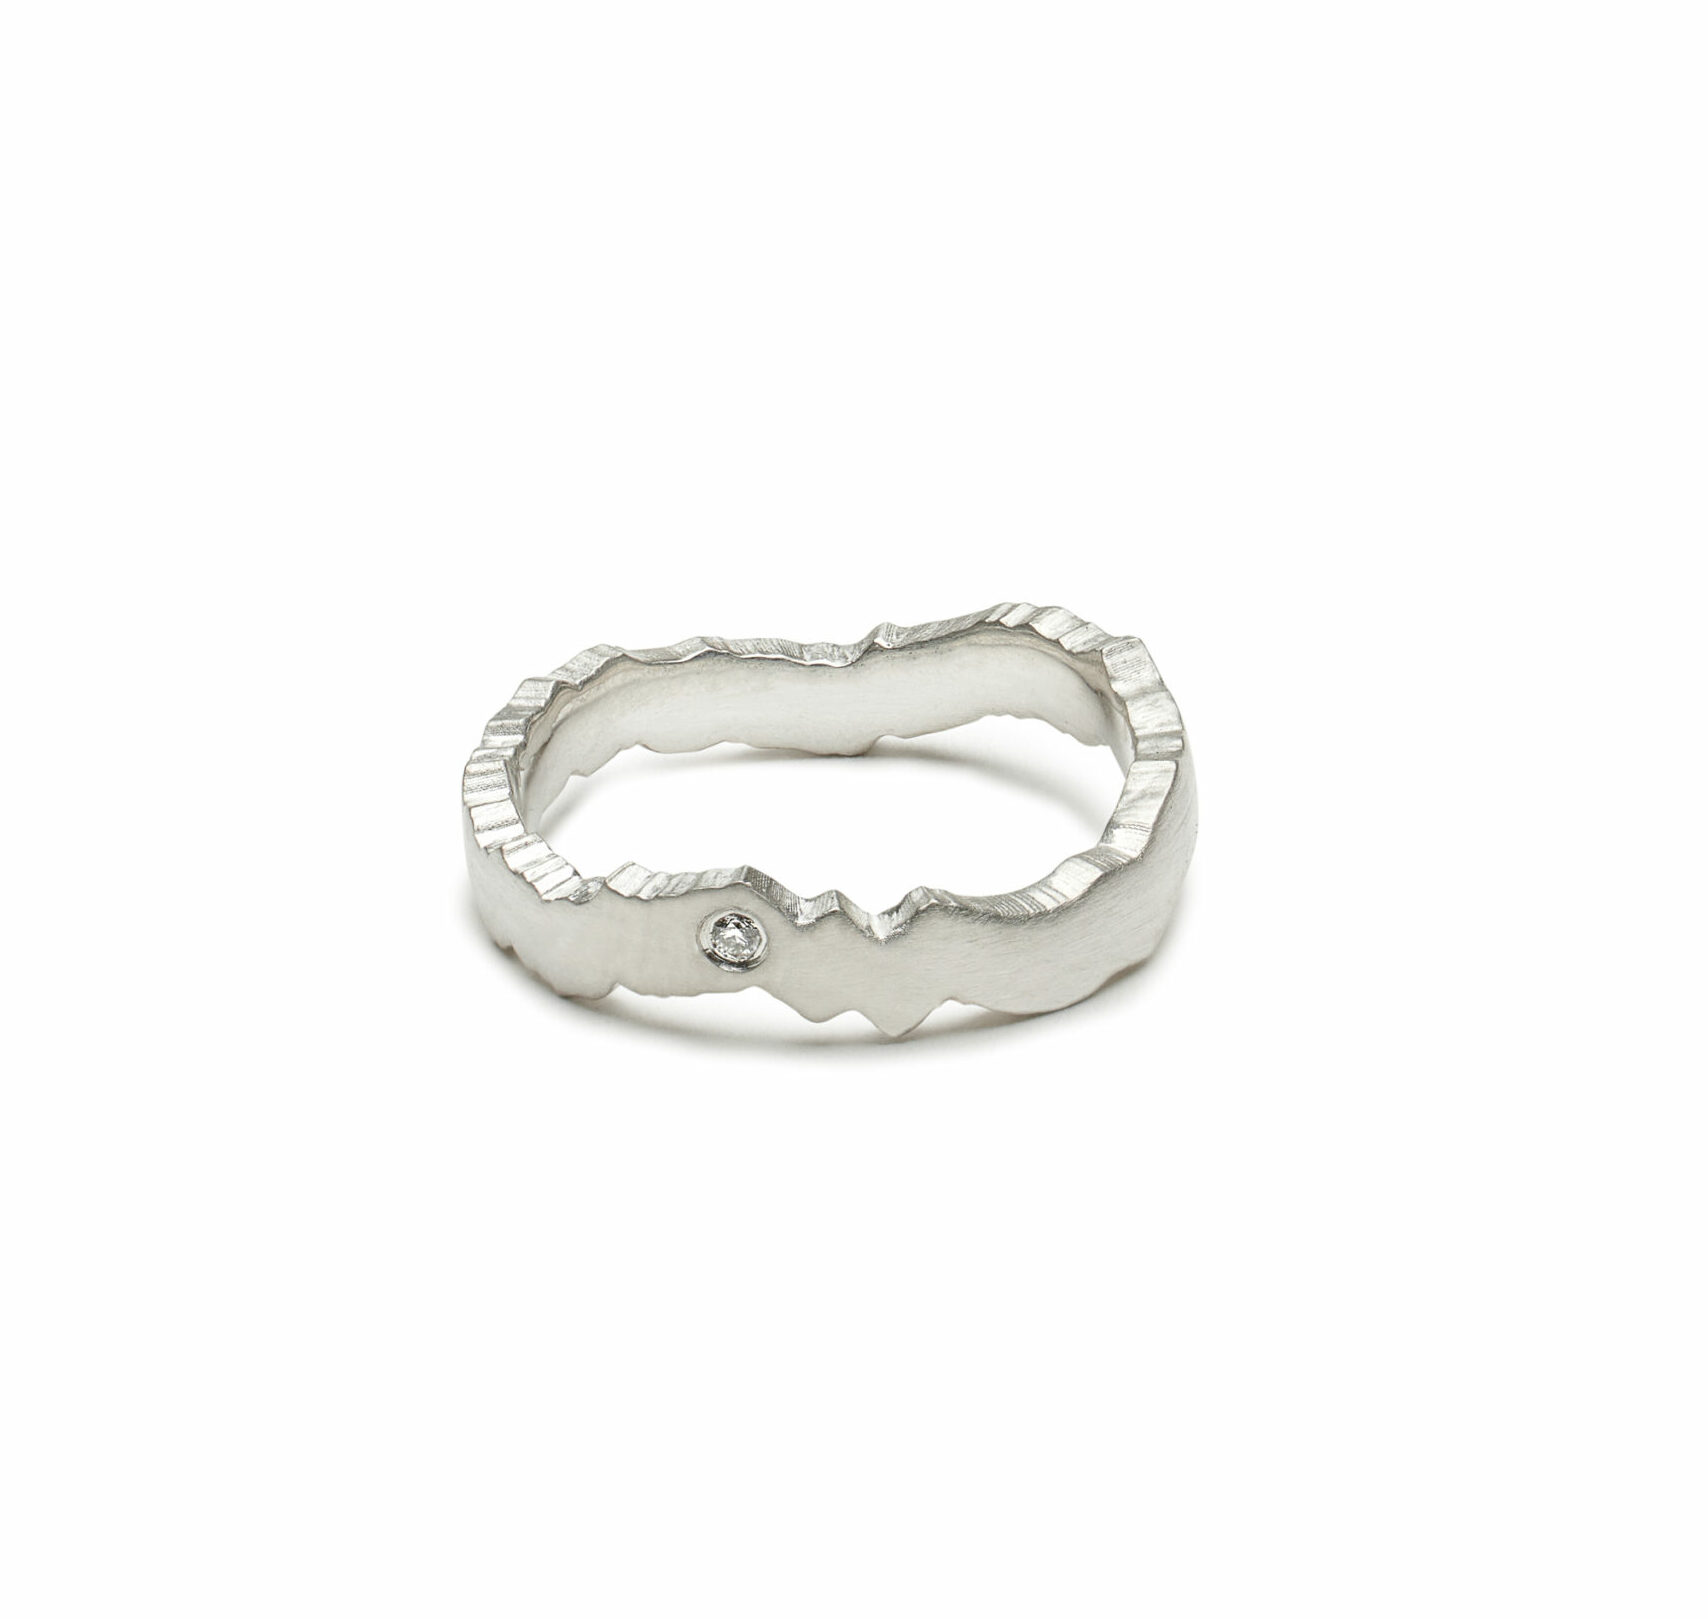 Ring depicting the ridgeline of the long trail in Vermont